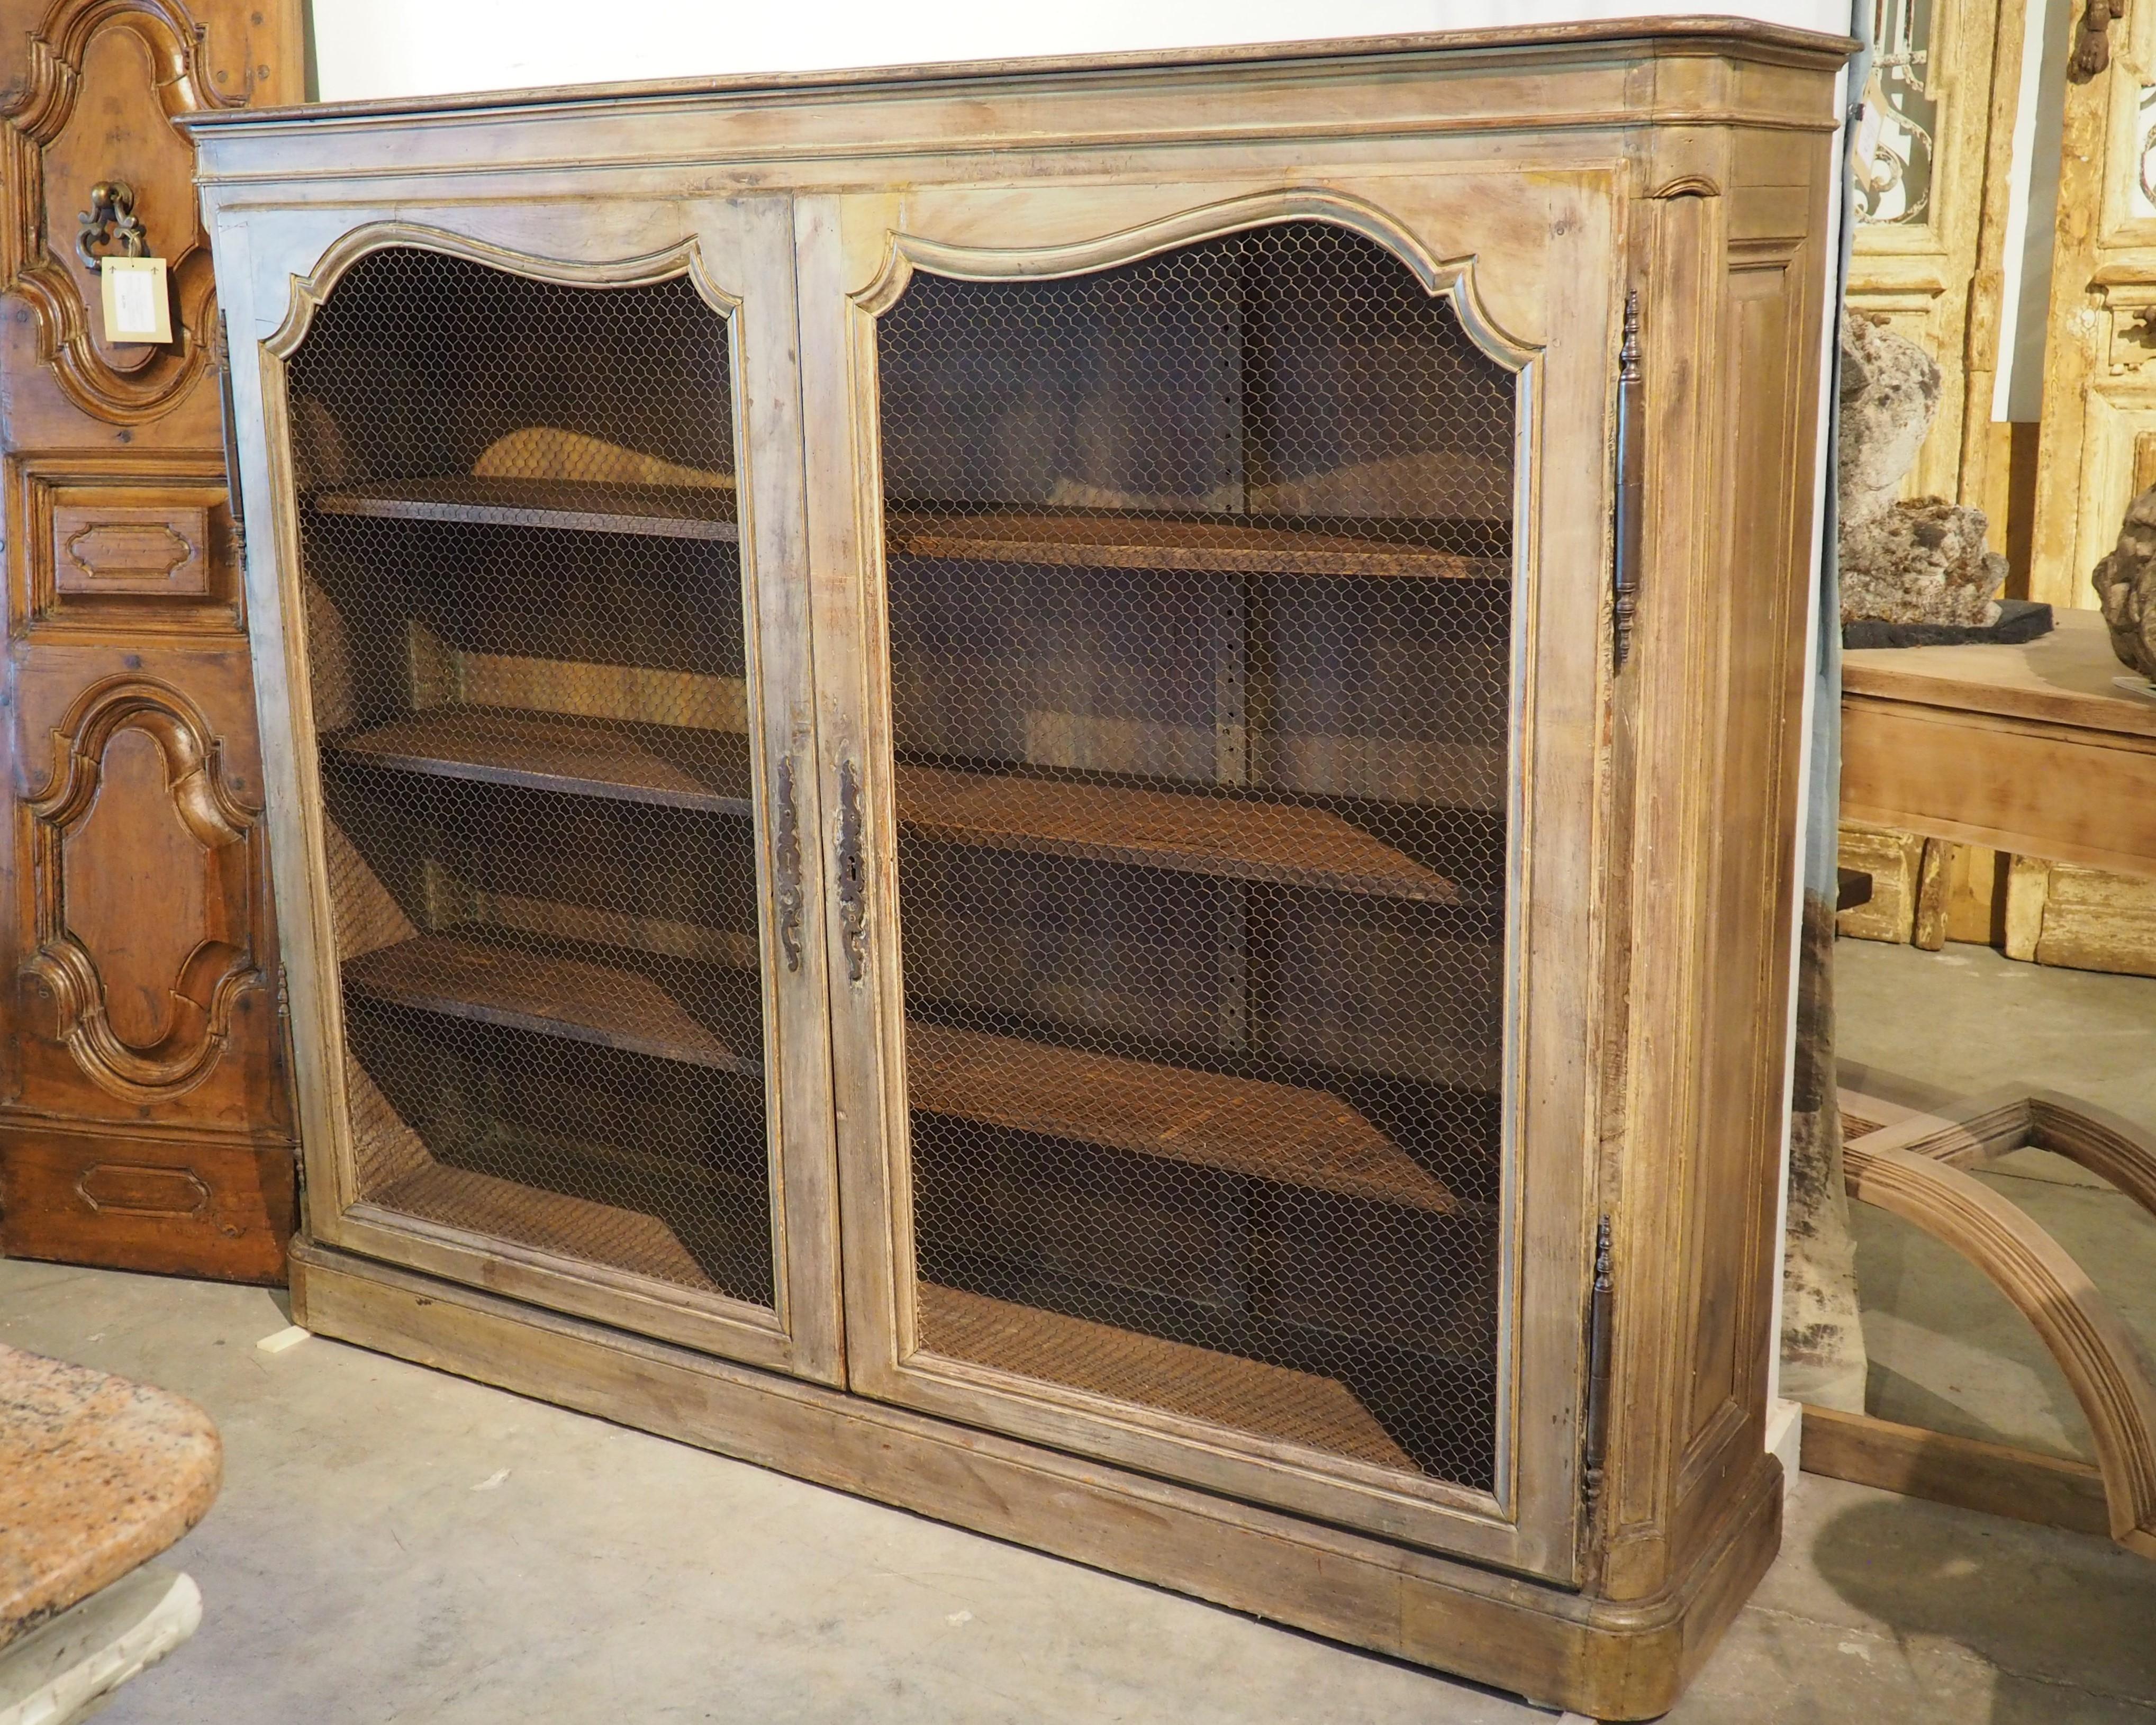 Early 19th Century French Bibliotheque Cabinet with Wire Mesh Door Panels 12